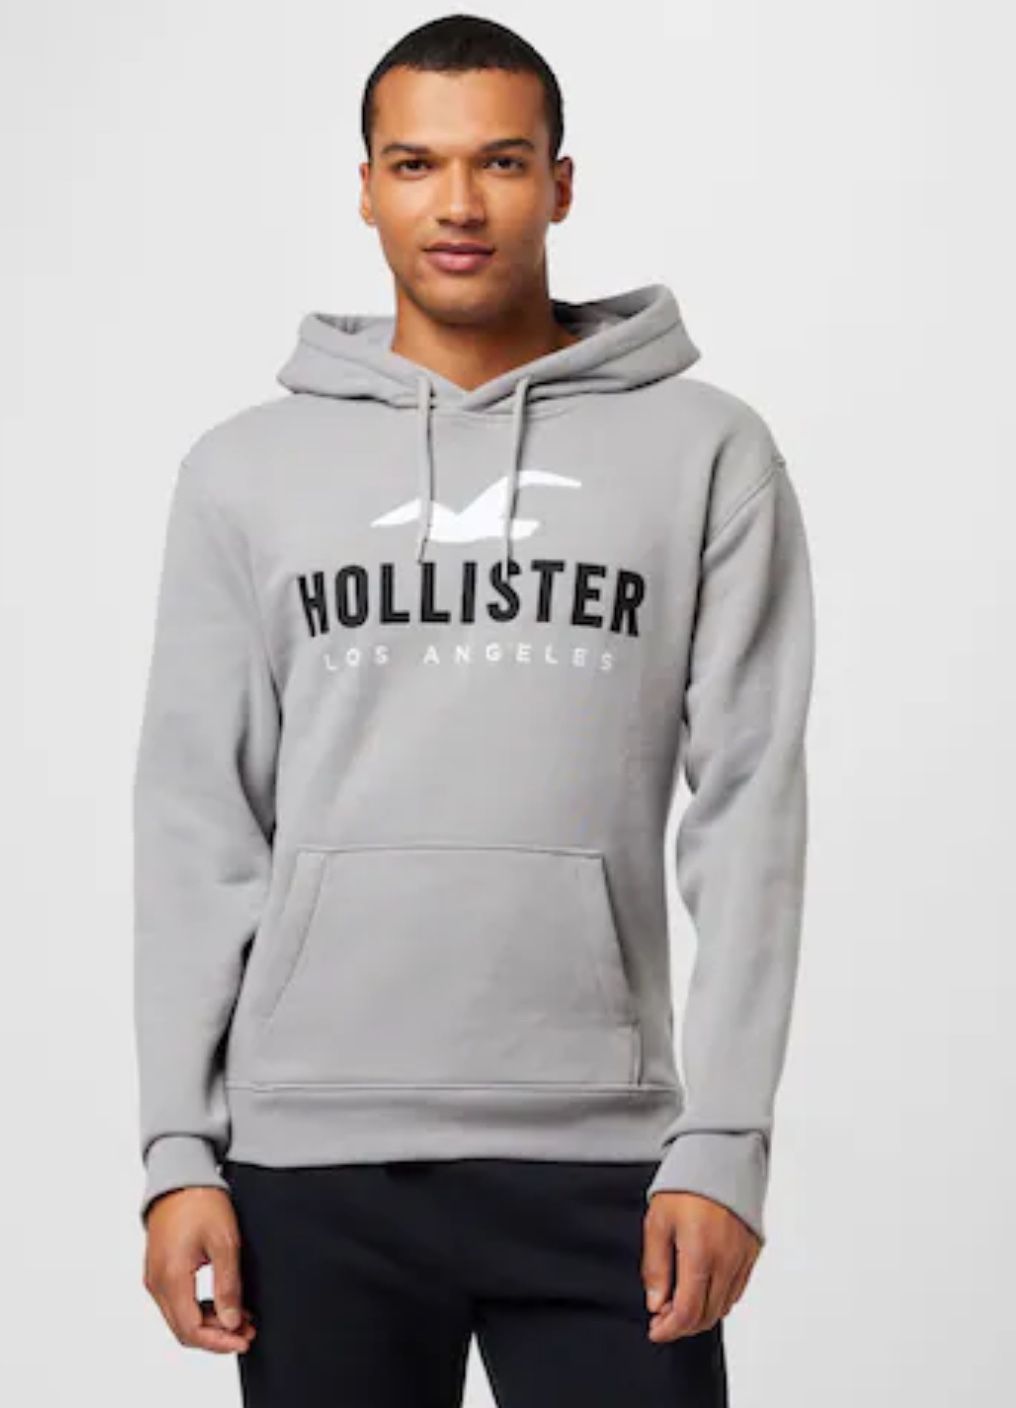 Hollister HOODIE in grey  size Large